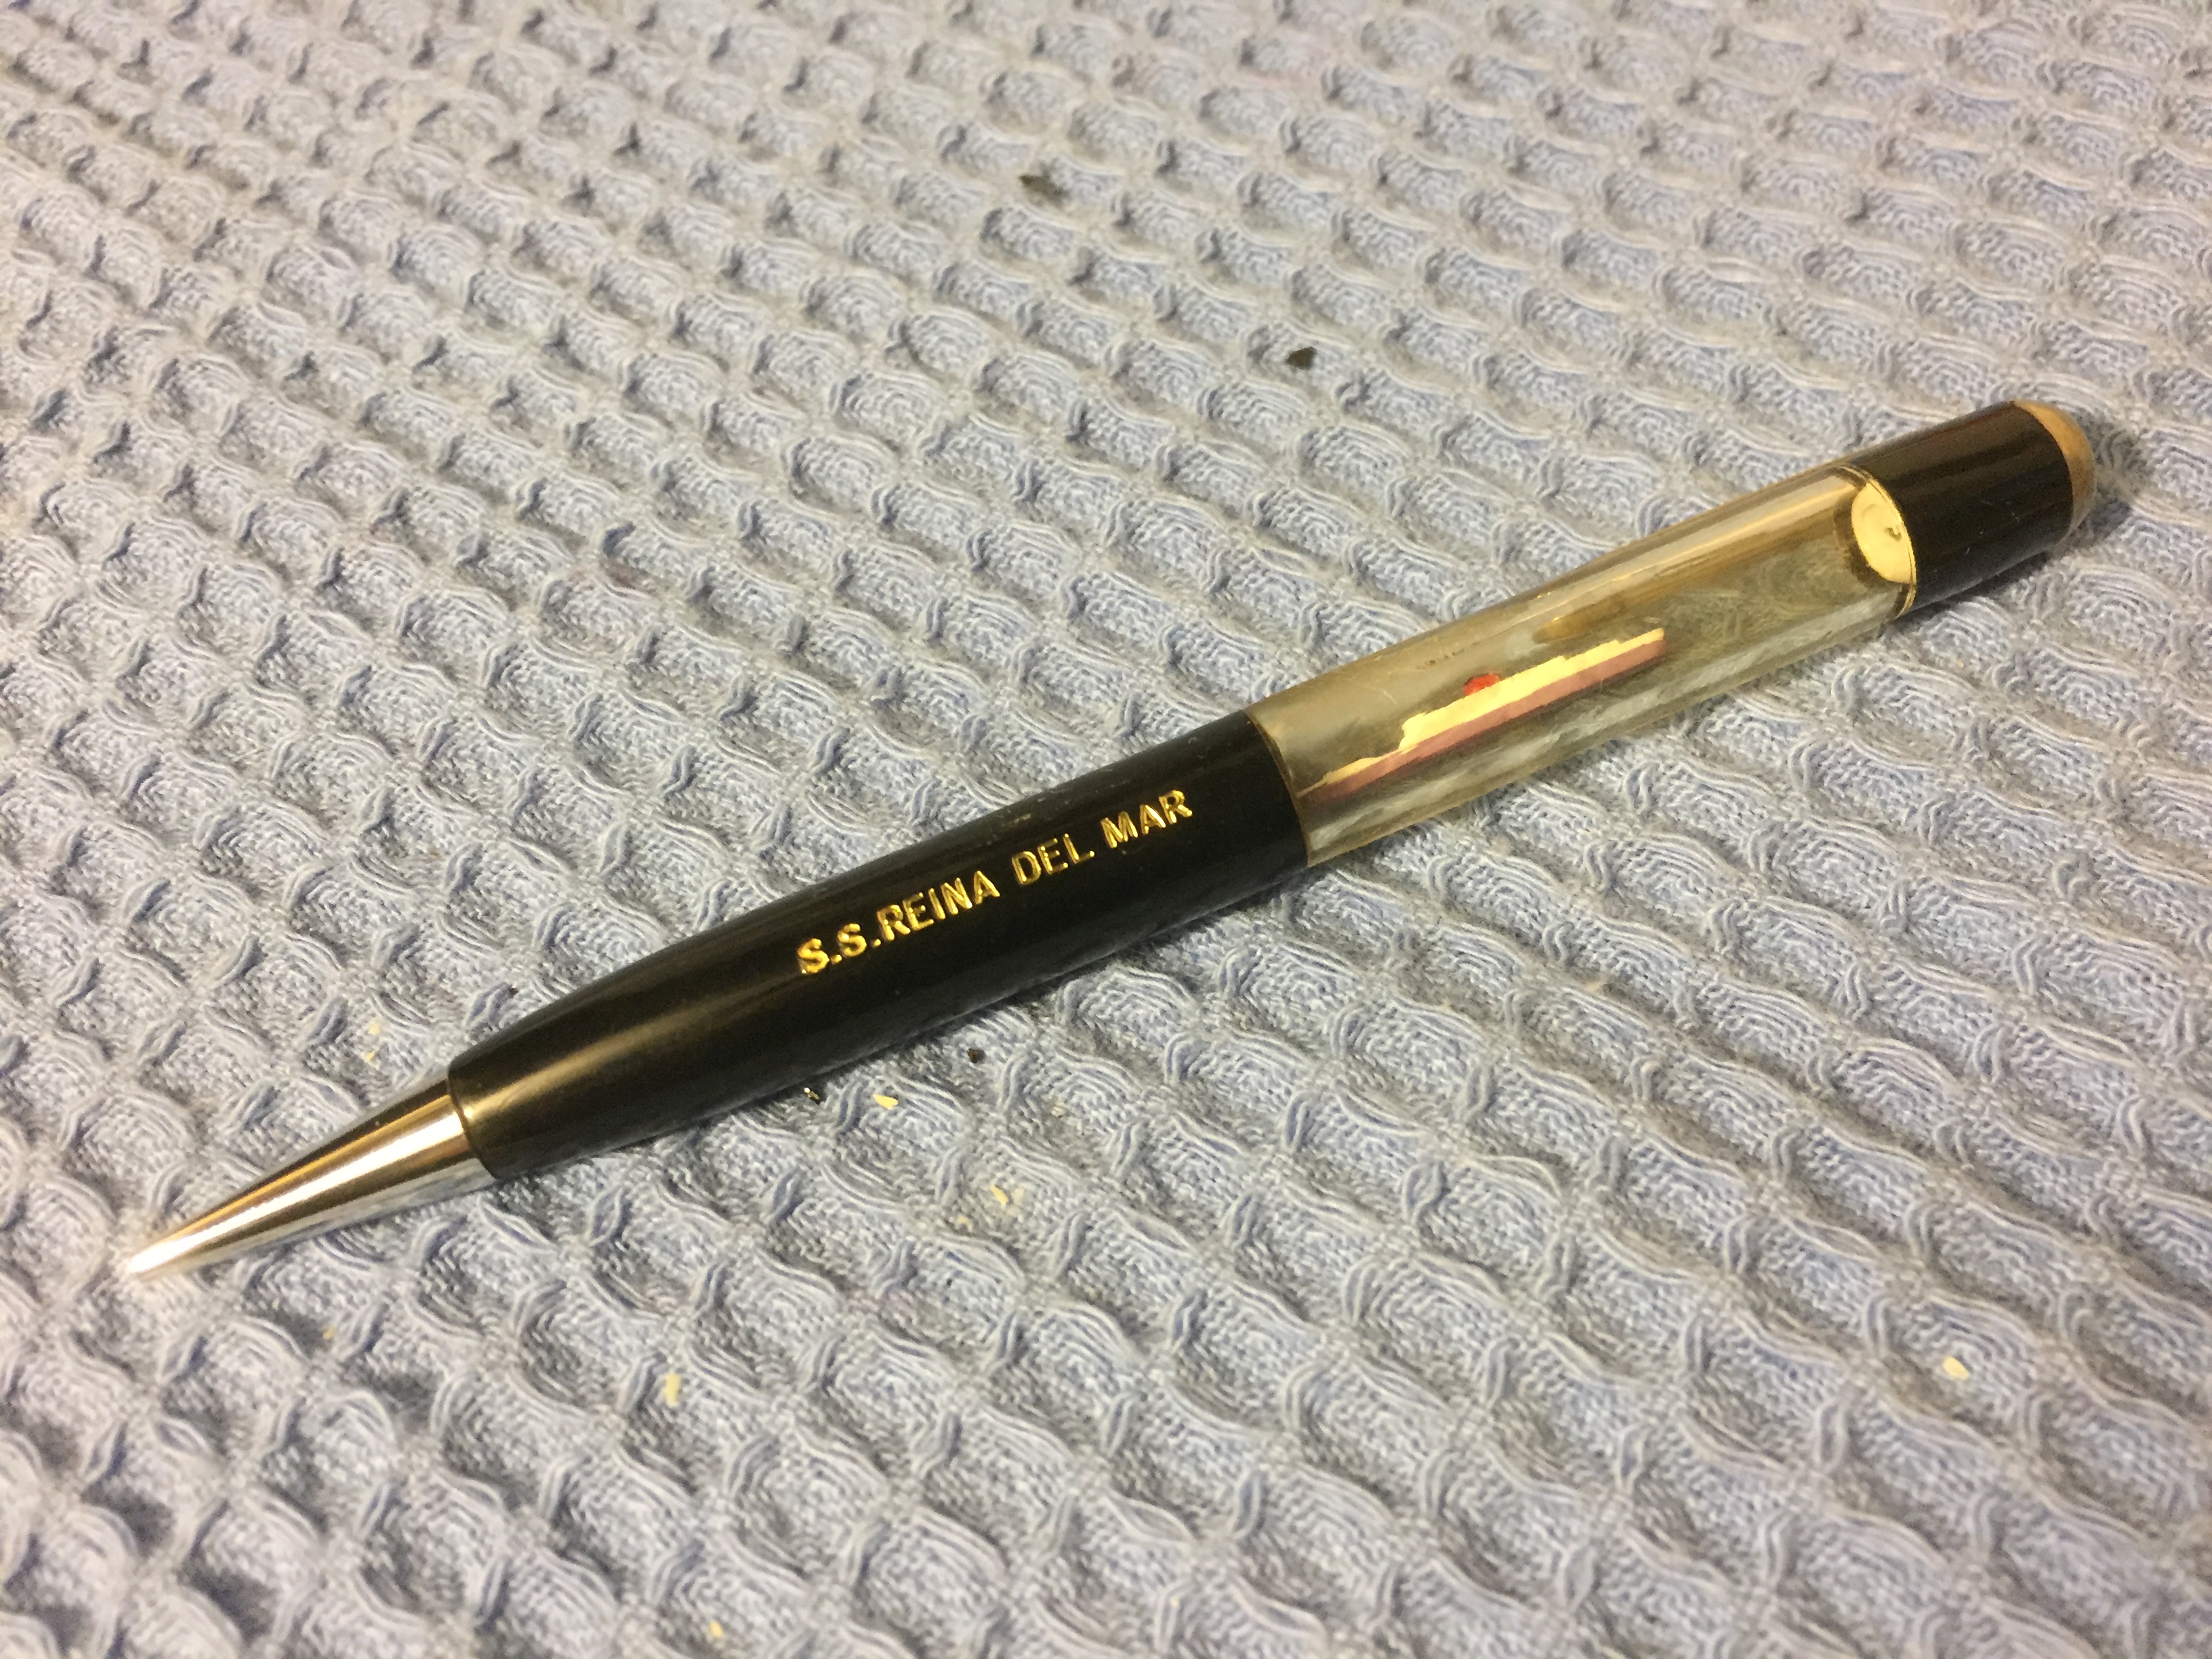 SOUVENIR PROPELLING PENCIL FROM THE VESSEL THE SS REINA DEL MAR